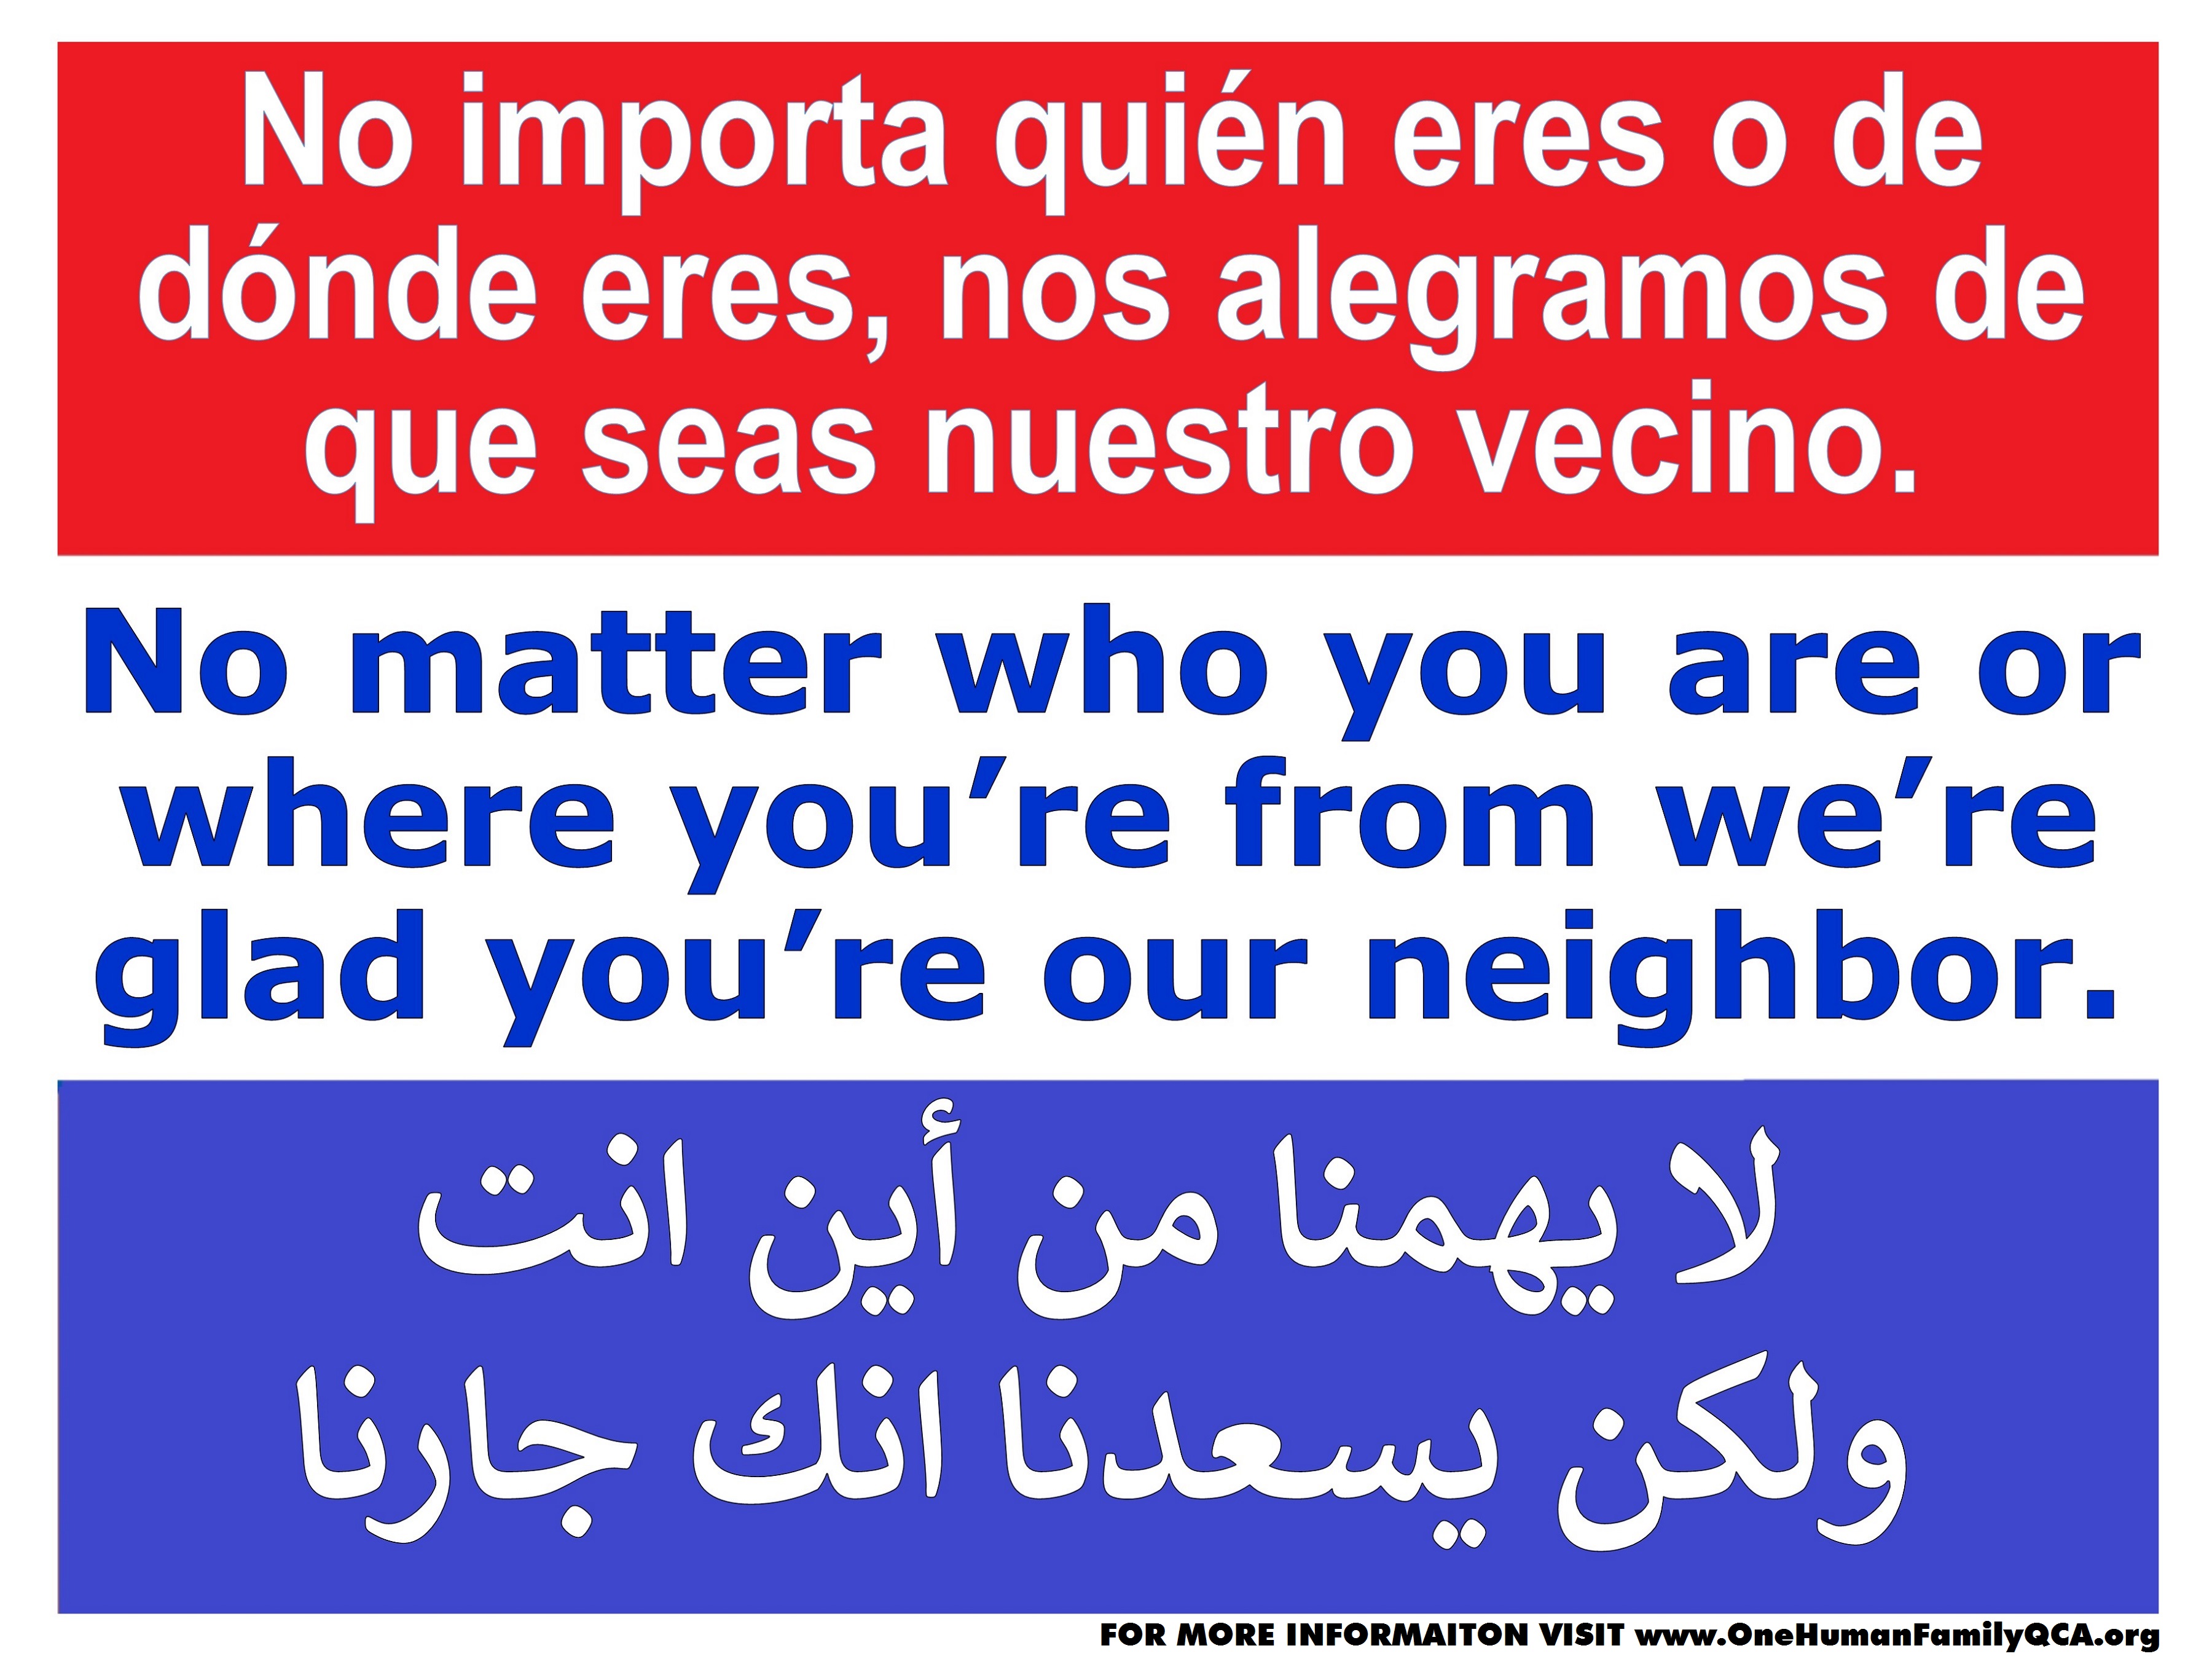 Lawn sign that welcomes neighbors in Spanish, English, and Arabic